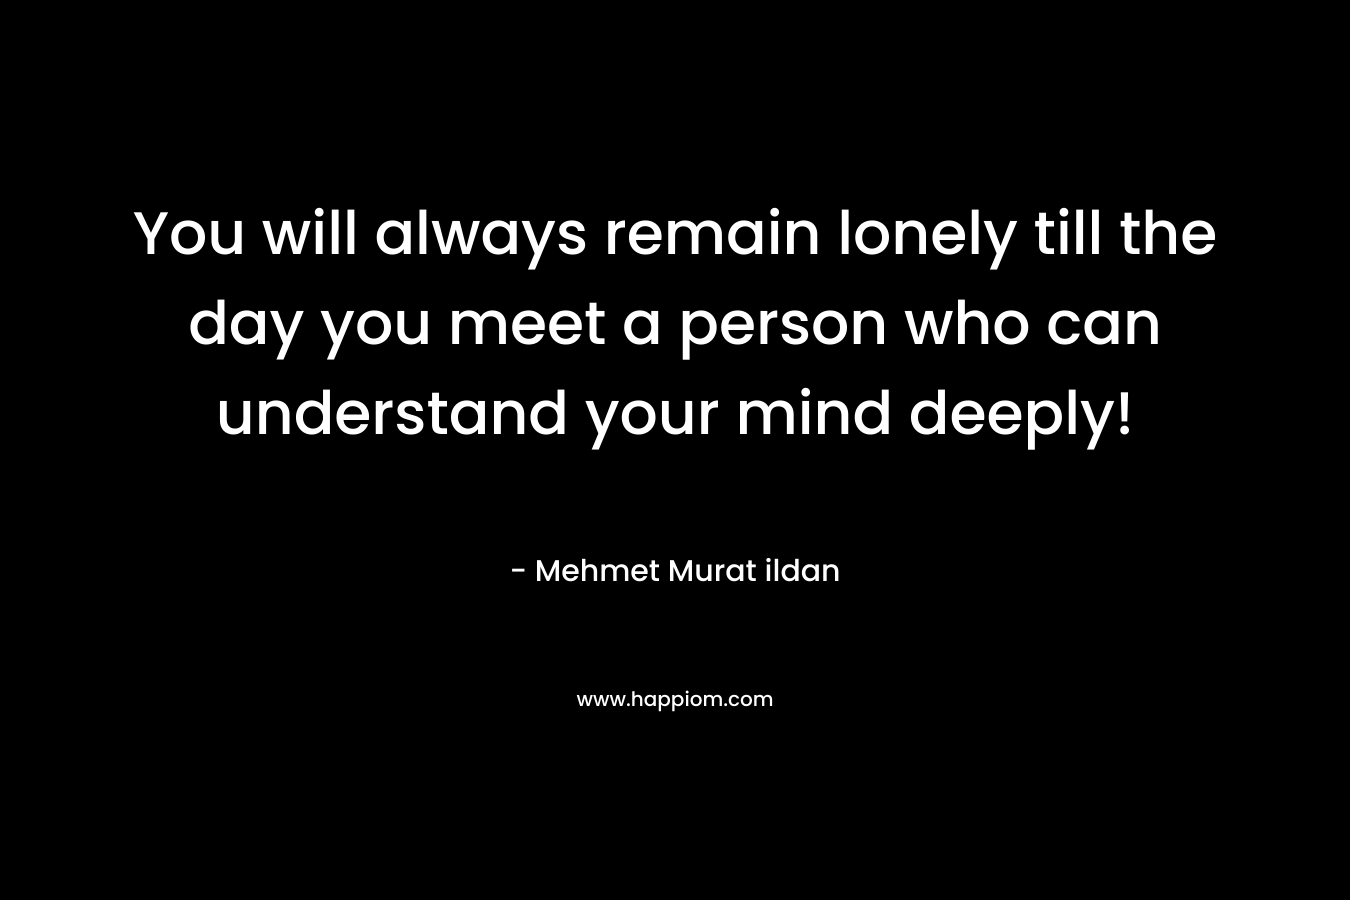 You will always remain lonely till the day you meet a person who can understand your mind deeply!